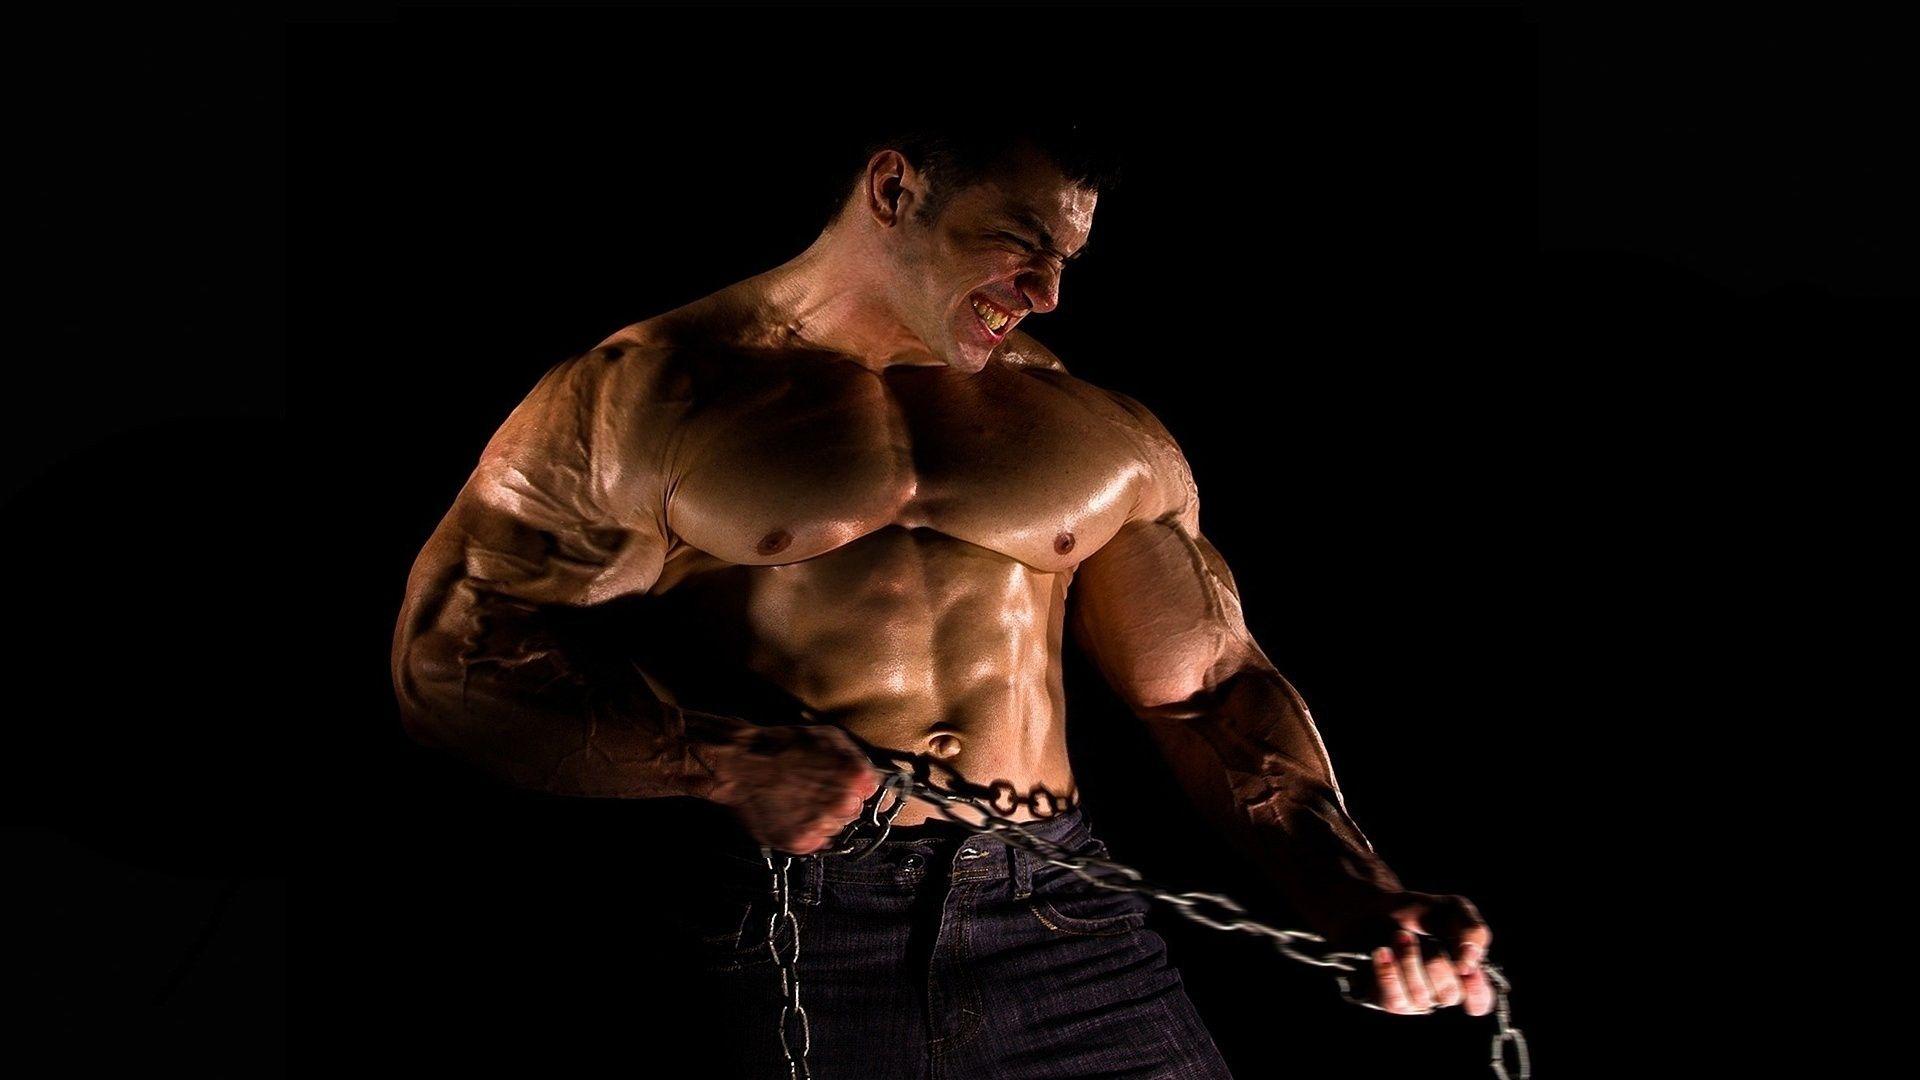 BODYBUILDER Full HD Wallpaper and Background Imagex1080